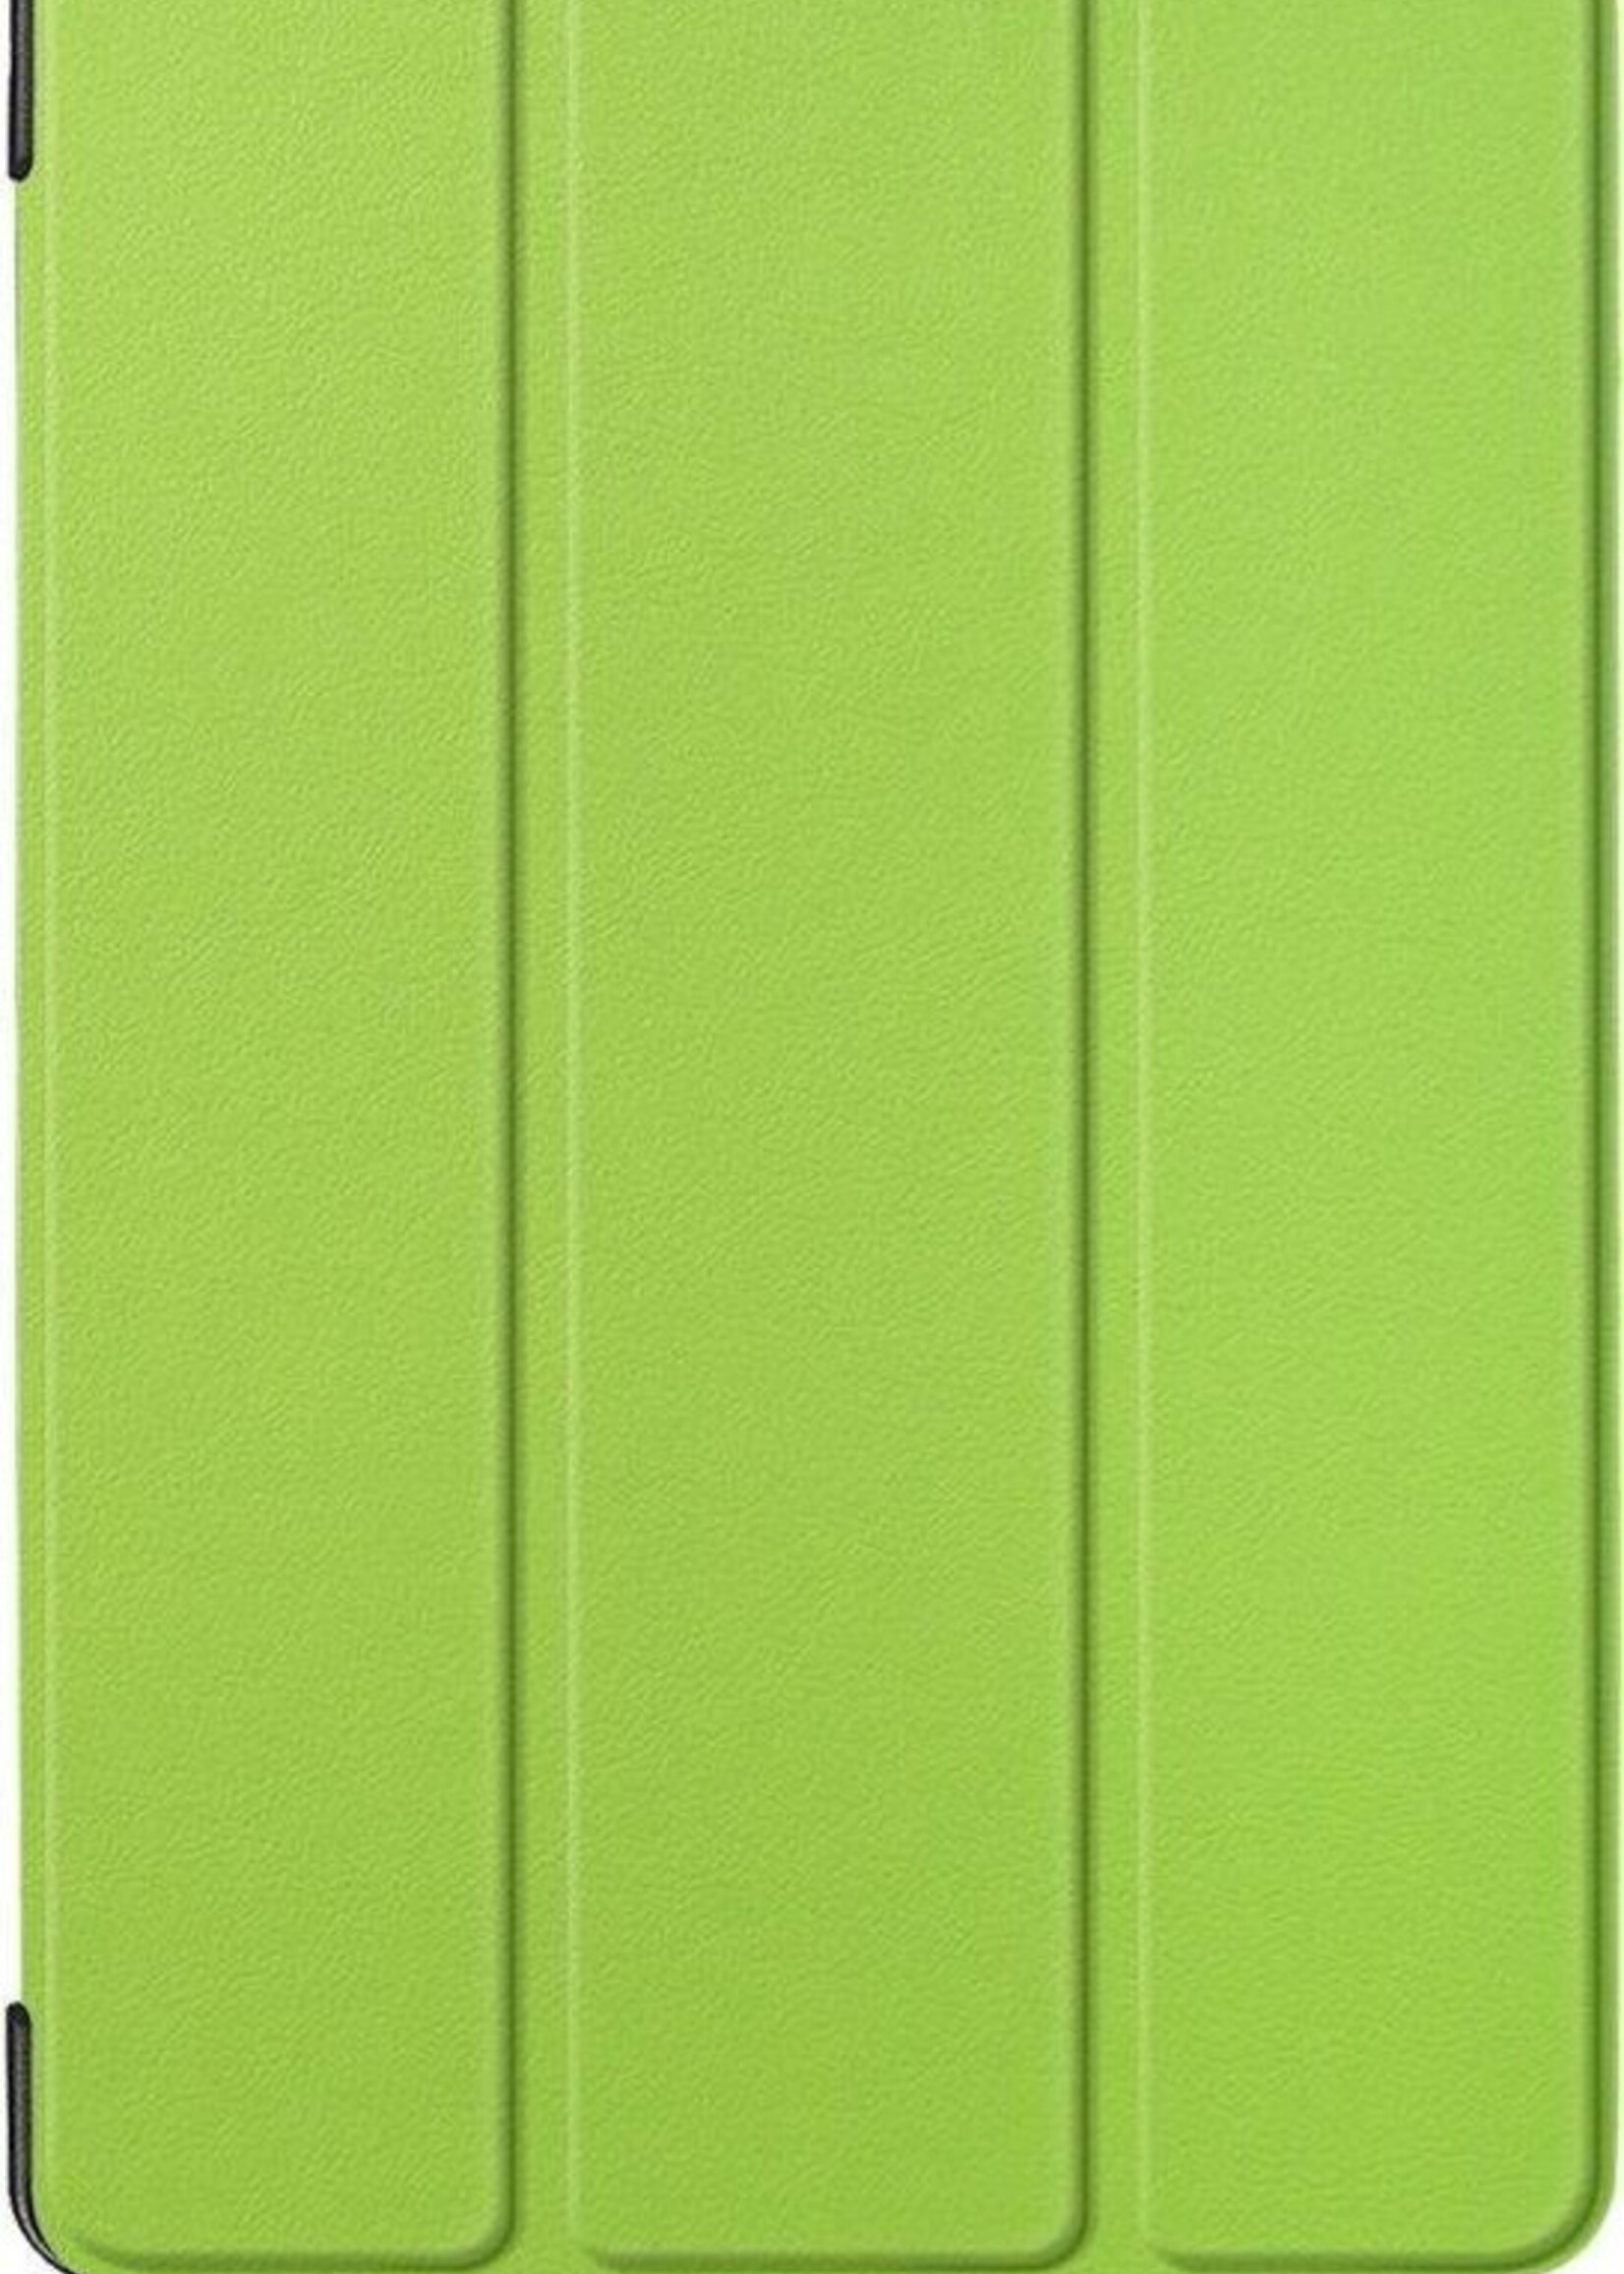 BTH Hoes Geschikt voor Samsung Galaxy Tab A 10.5 2018 Hoes Book Case Hoesje Trifold Cover - Hoesje Geschikt voor Samsung Tab A 10.5 2018 Hoesje Bookcase - Groen